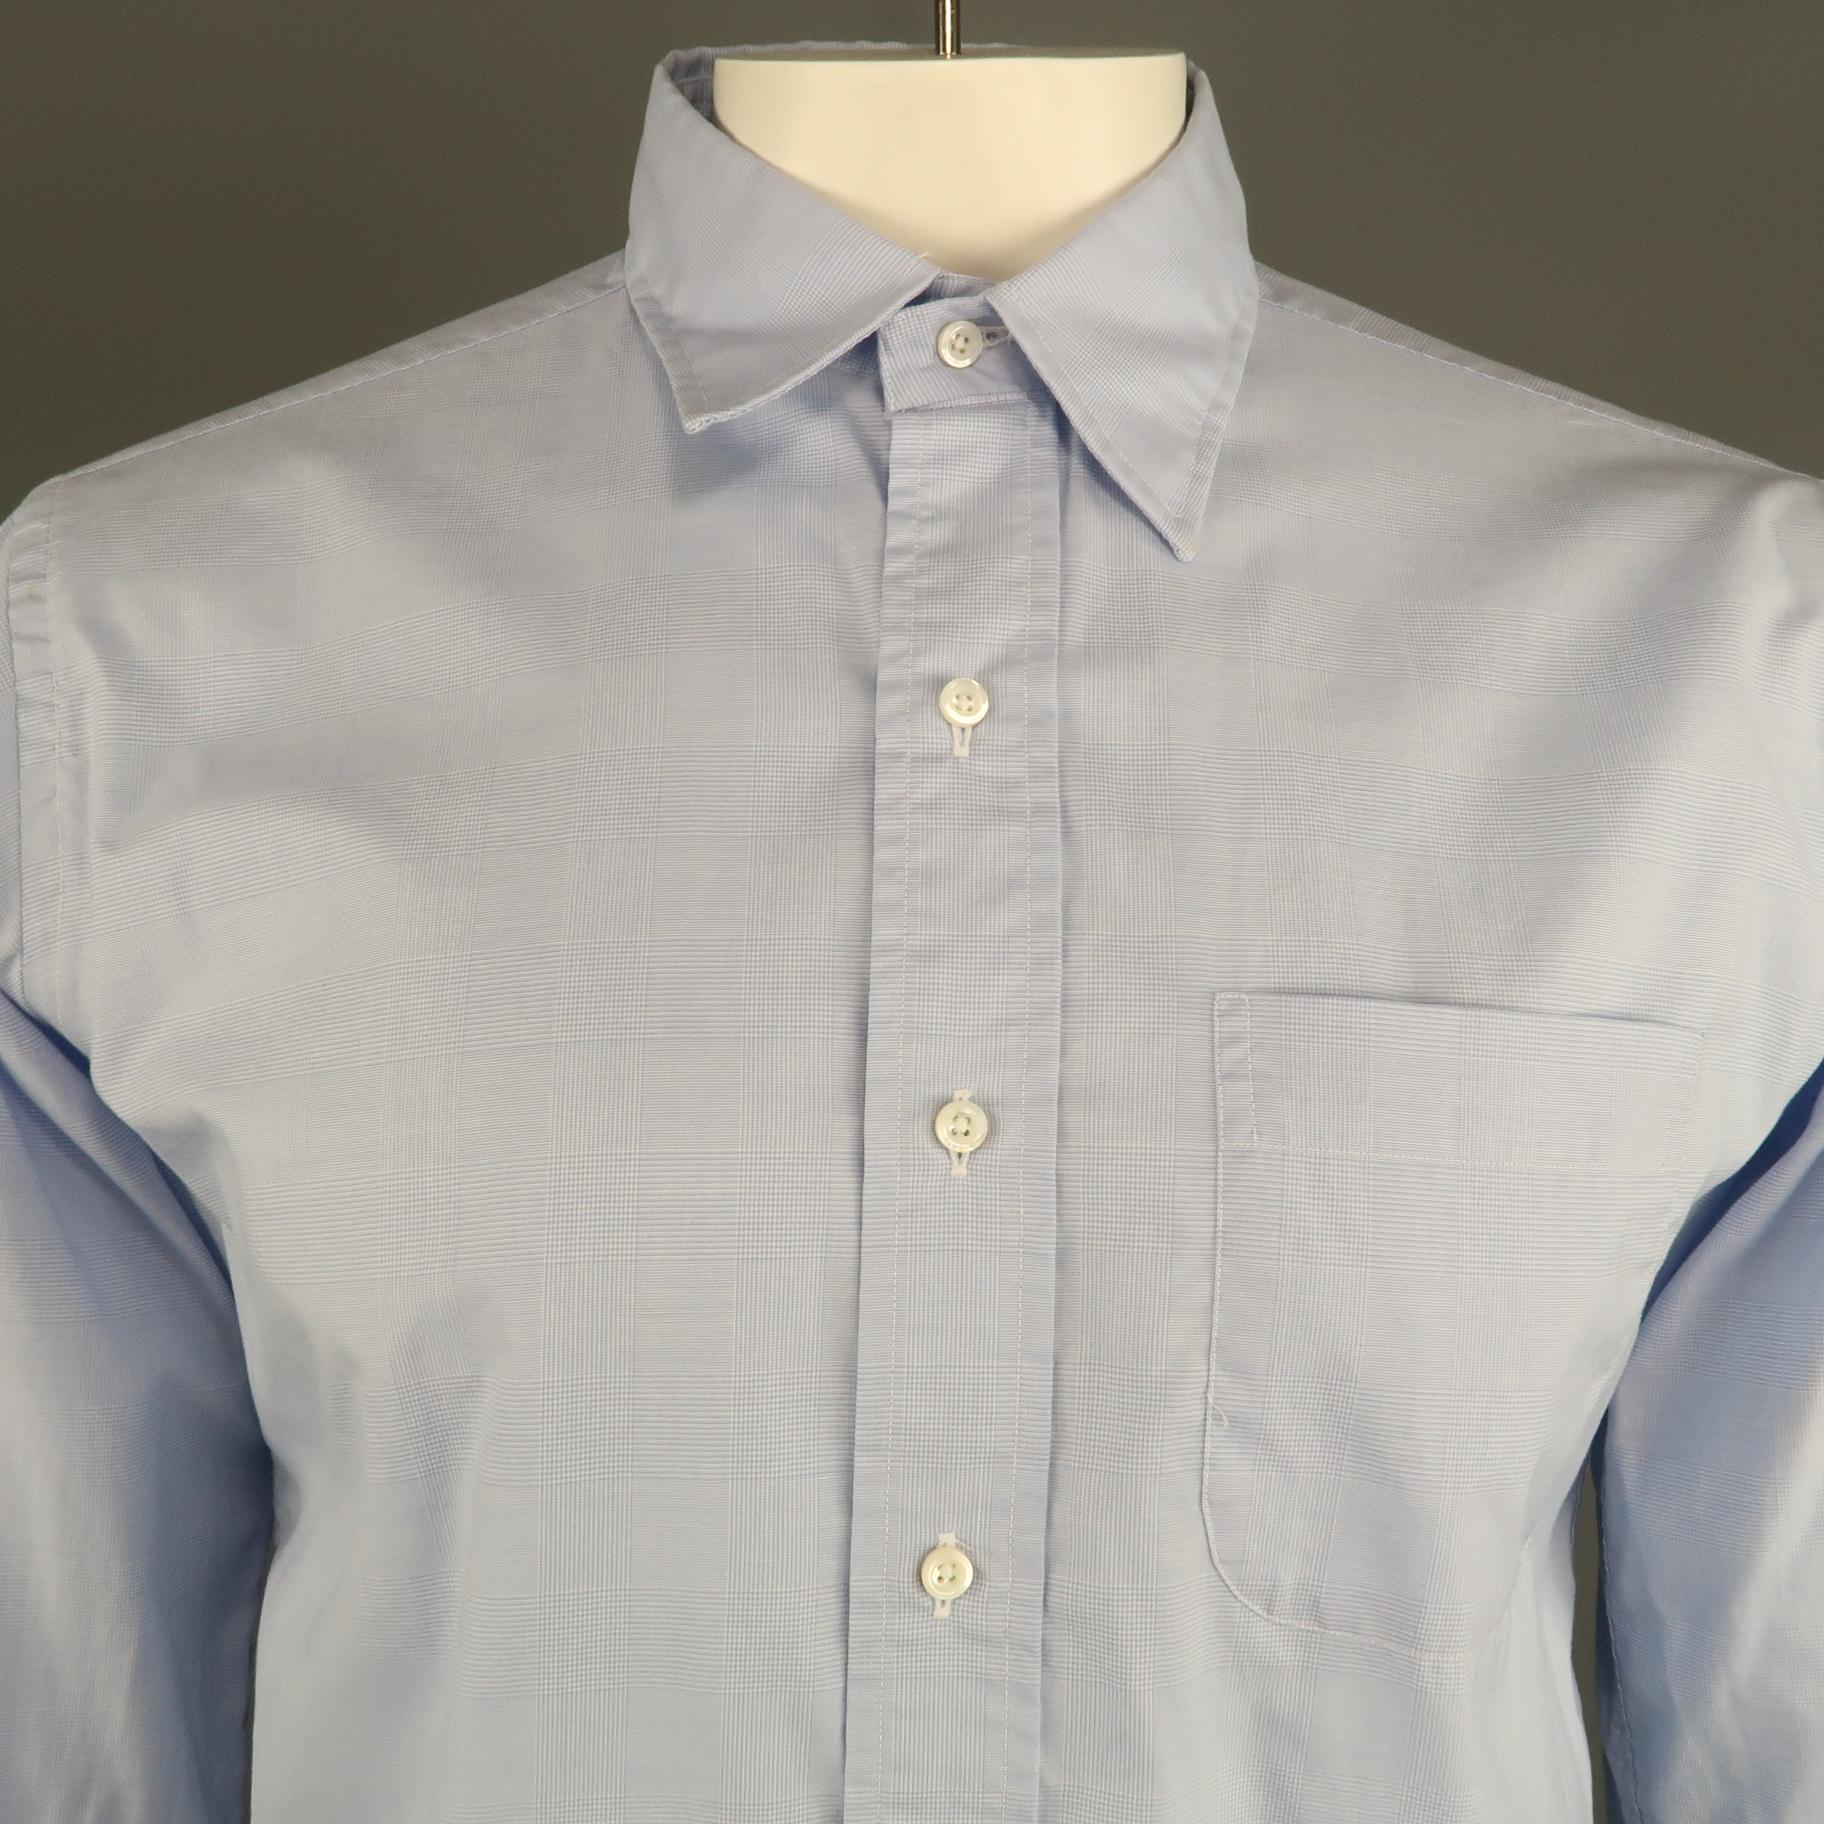 THOM BROWNE long sleeve shirt comes in a blue glenplaid cotton featuring a classic spread collar and a front patch pocket. Made in USA.
 
Excellent Pre-Owned Condition.
Marked: 5
 
Measurements:
 
Shoulder: 18 in.
Chest: 48 in.
Sleeve: 27